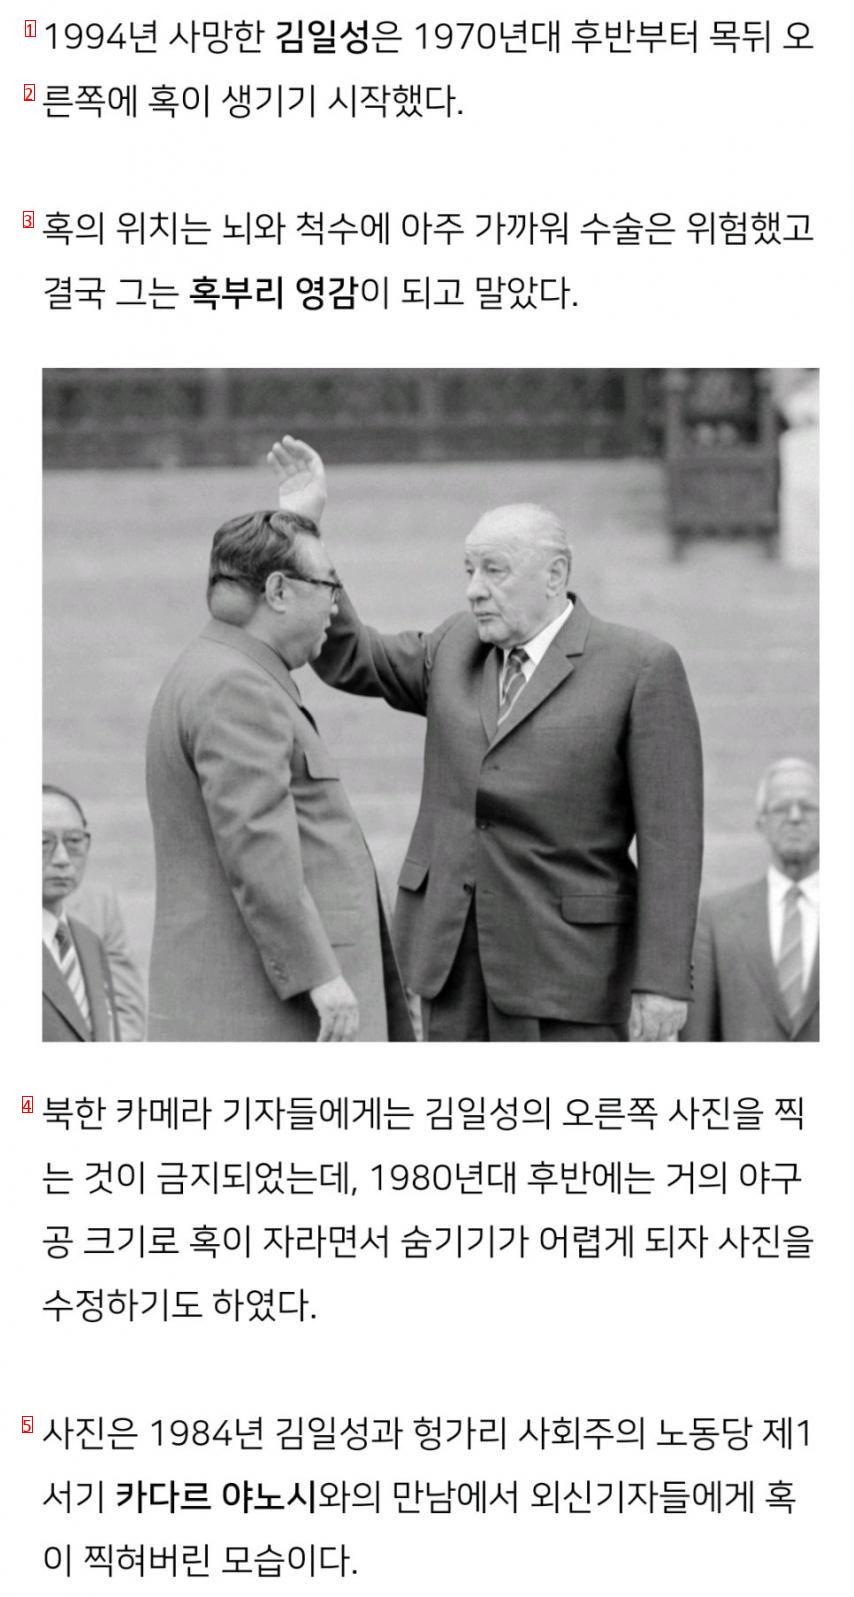 Kim Il-sung's hump caught by foreign media in 1984